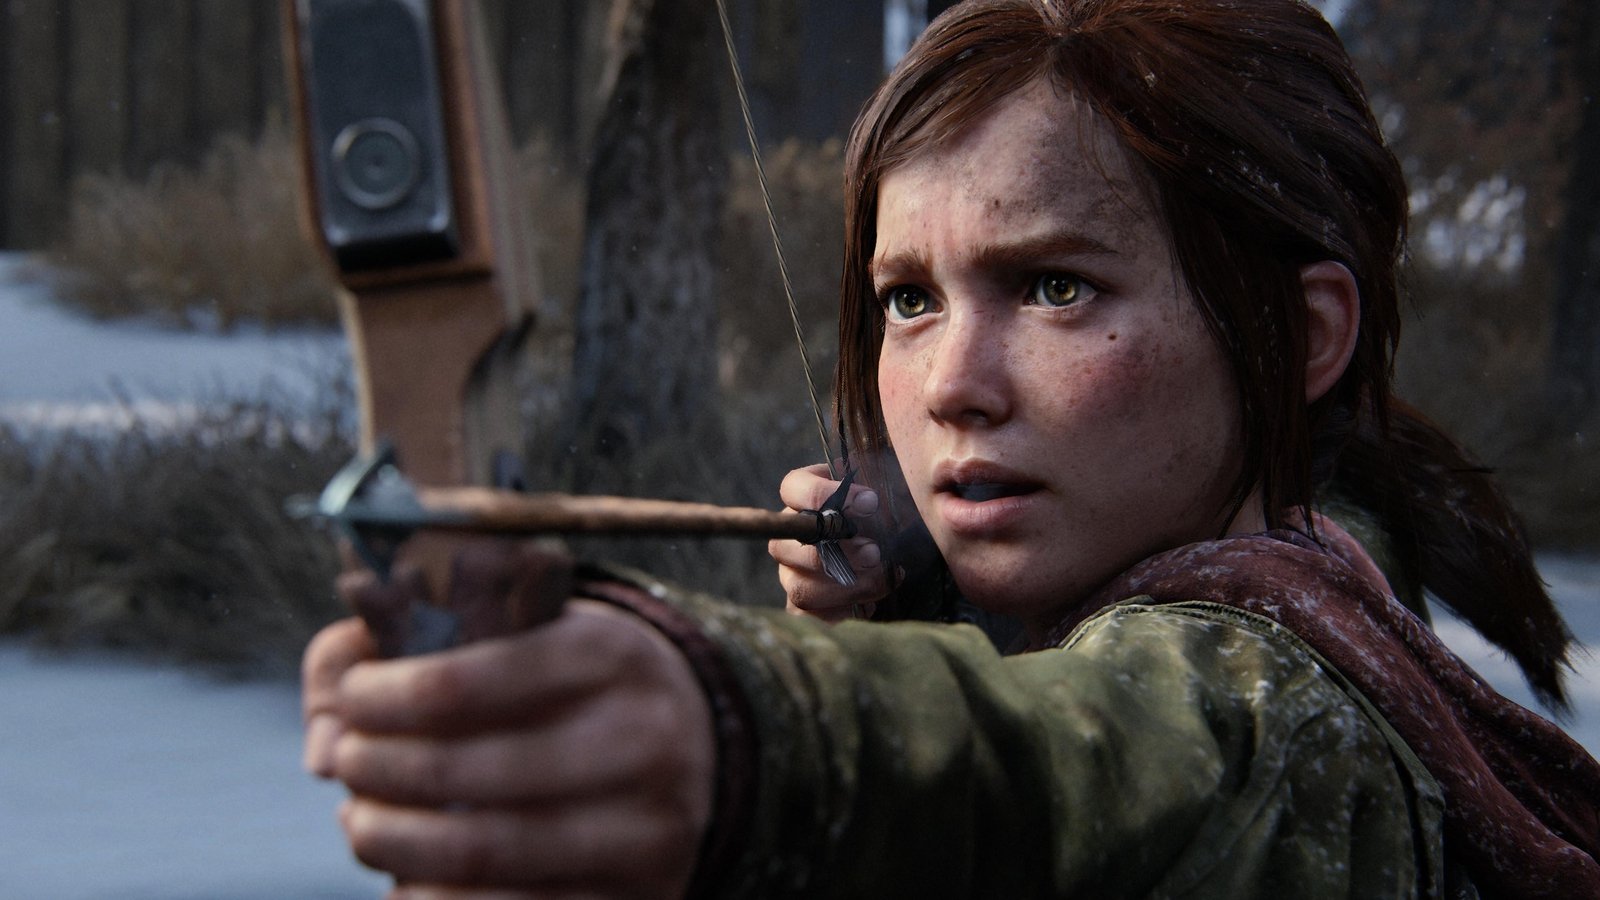 The Last of Us Part 1 reviewed - a video game classic remade